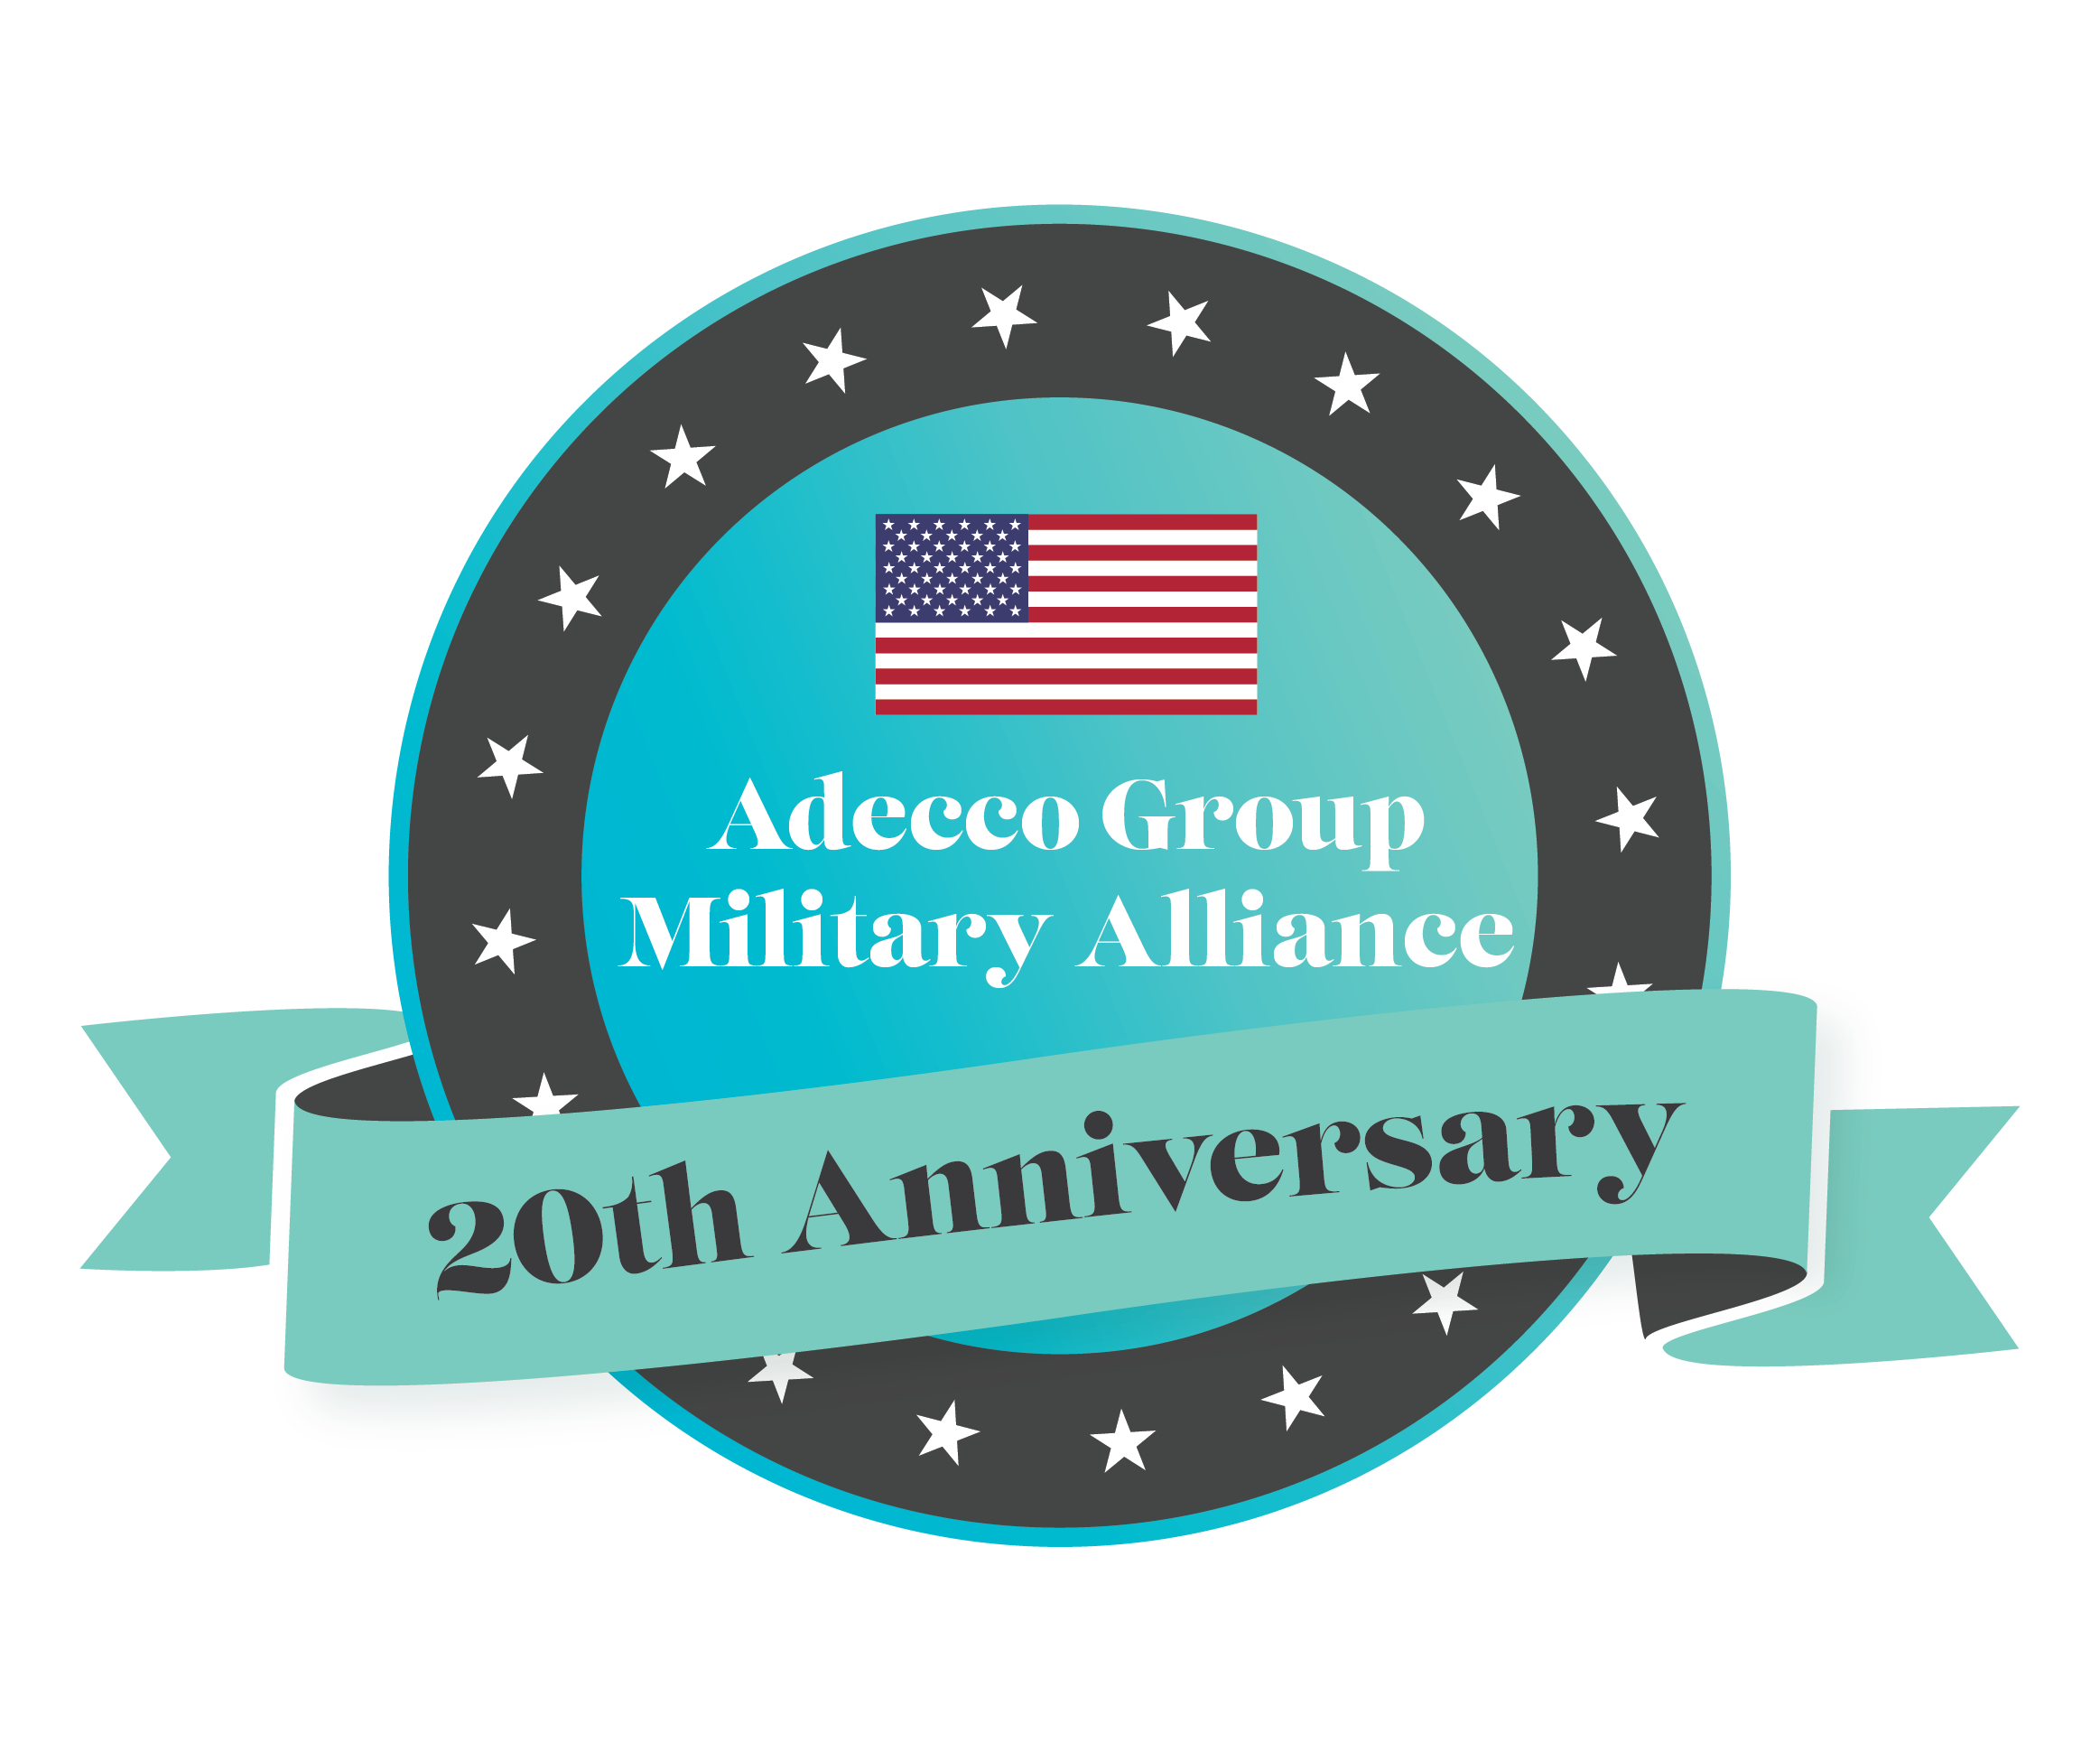 A badge that proudly displays the U.S.A. flag, with text underneath that reads 'Adecco Group Military Alliance - 20th Anniversary'